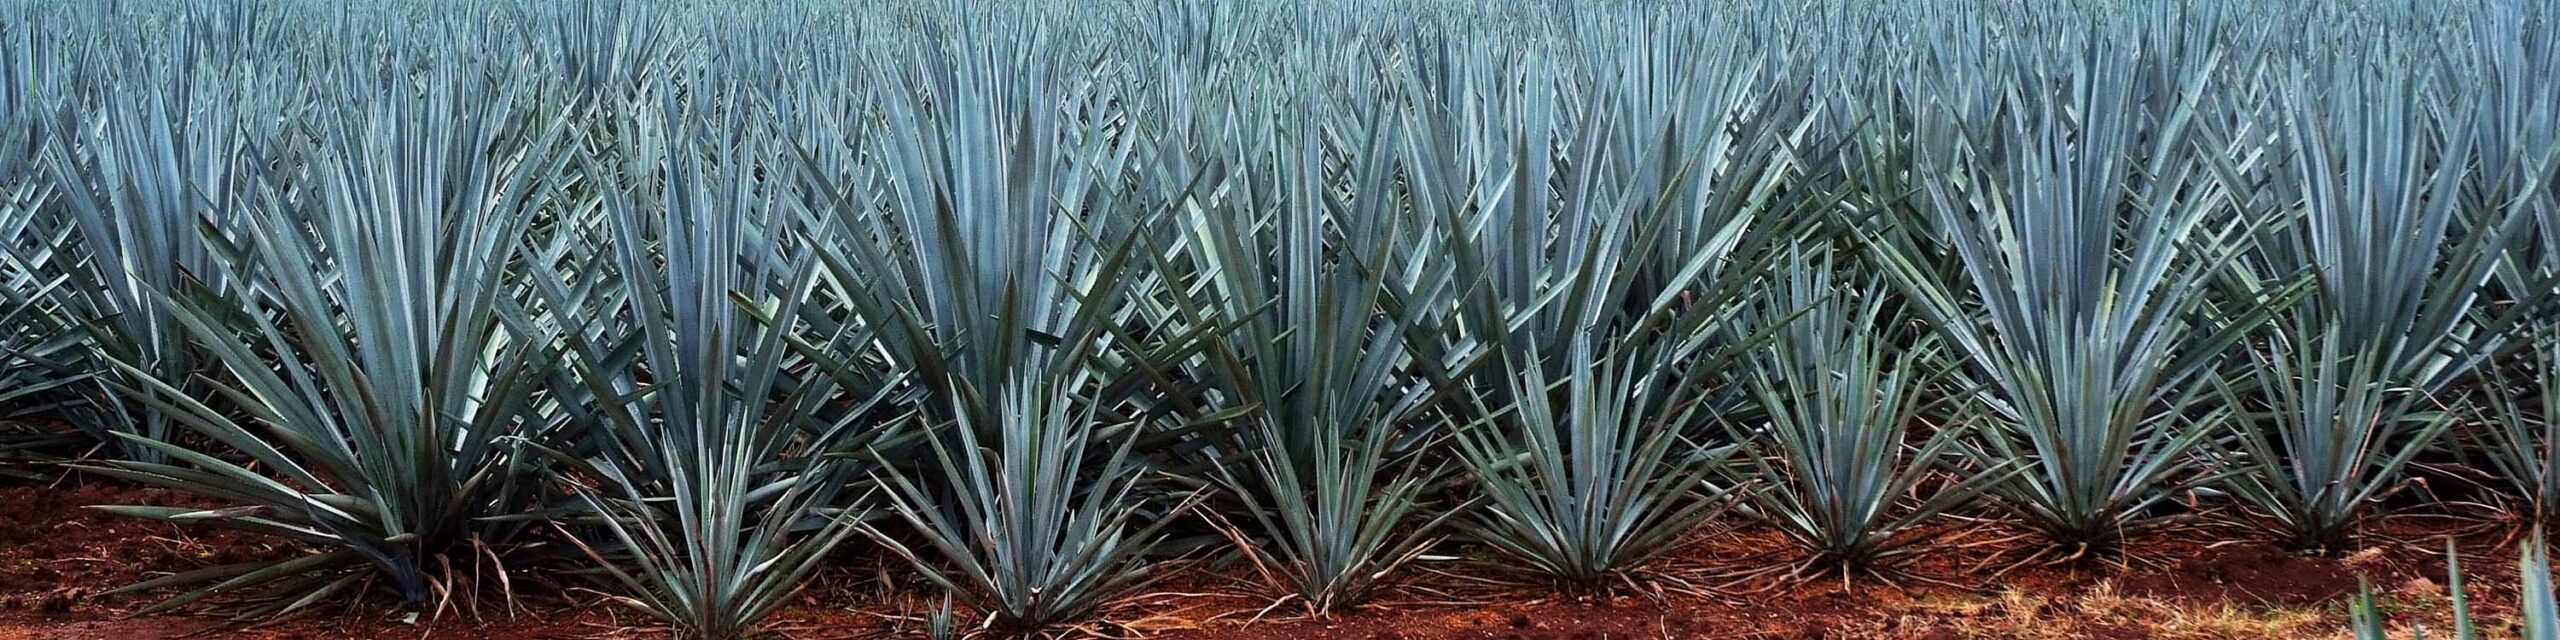 Rows of agave plants in a desert environment.